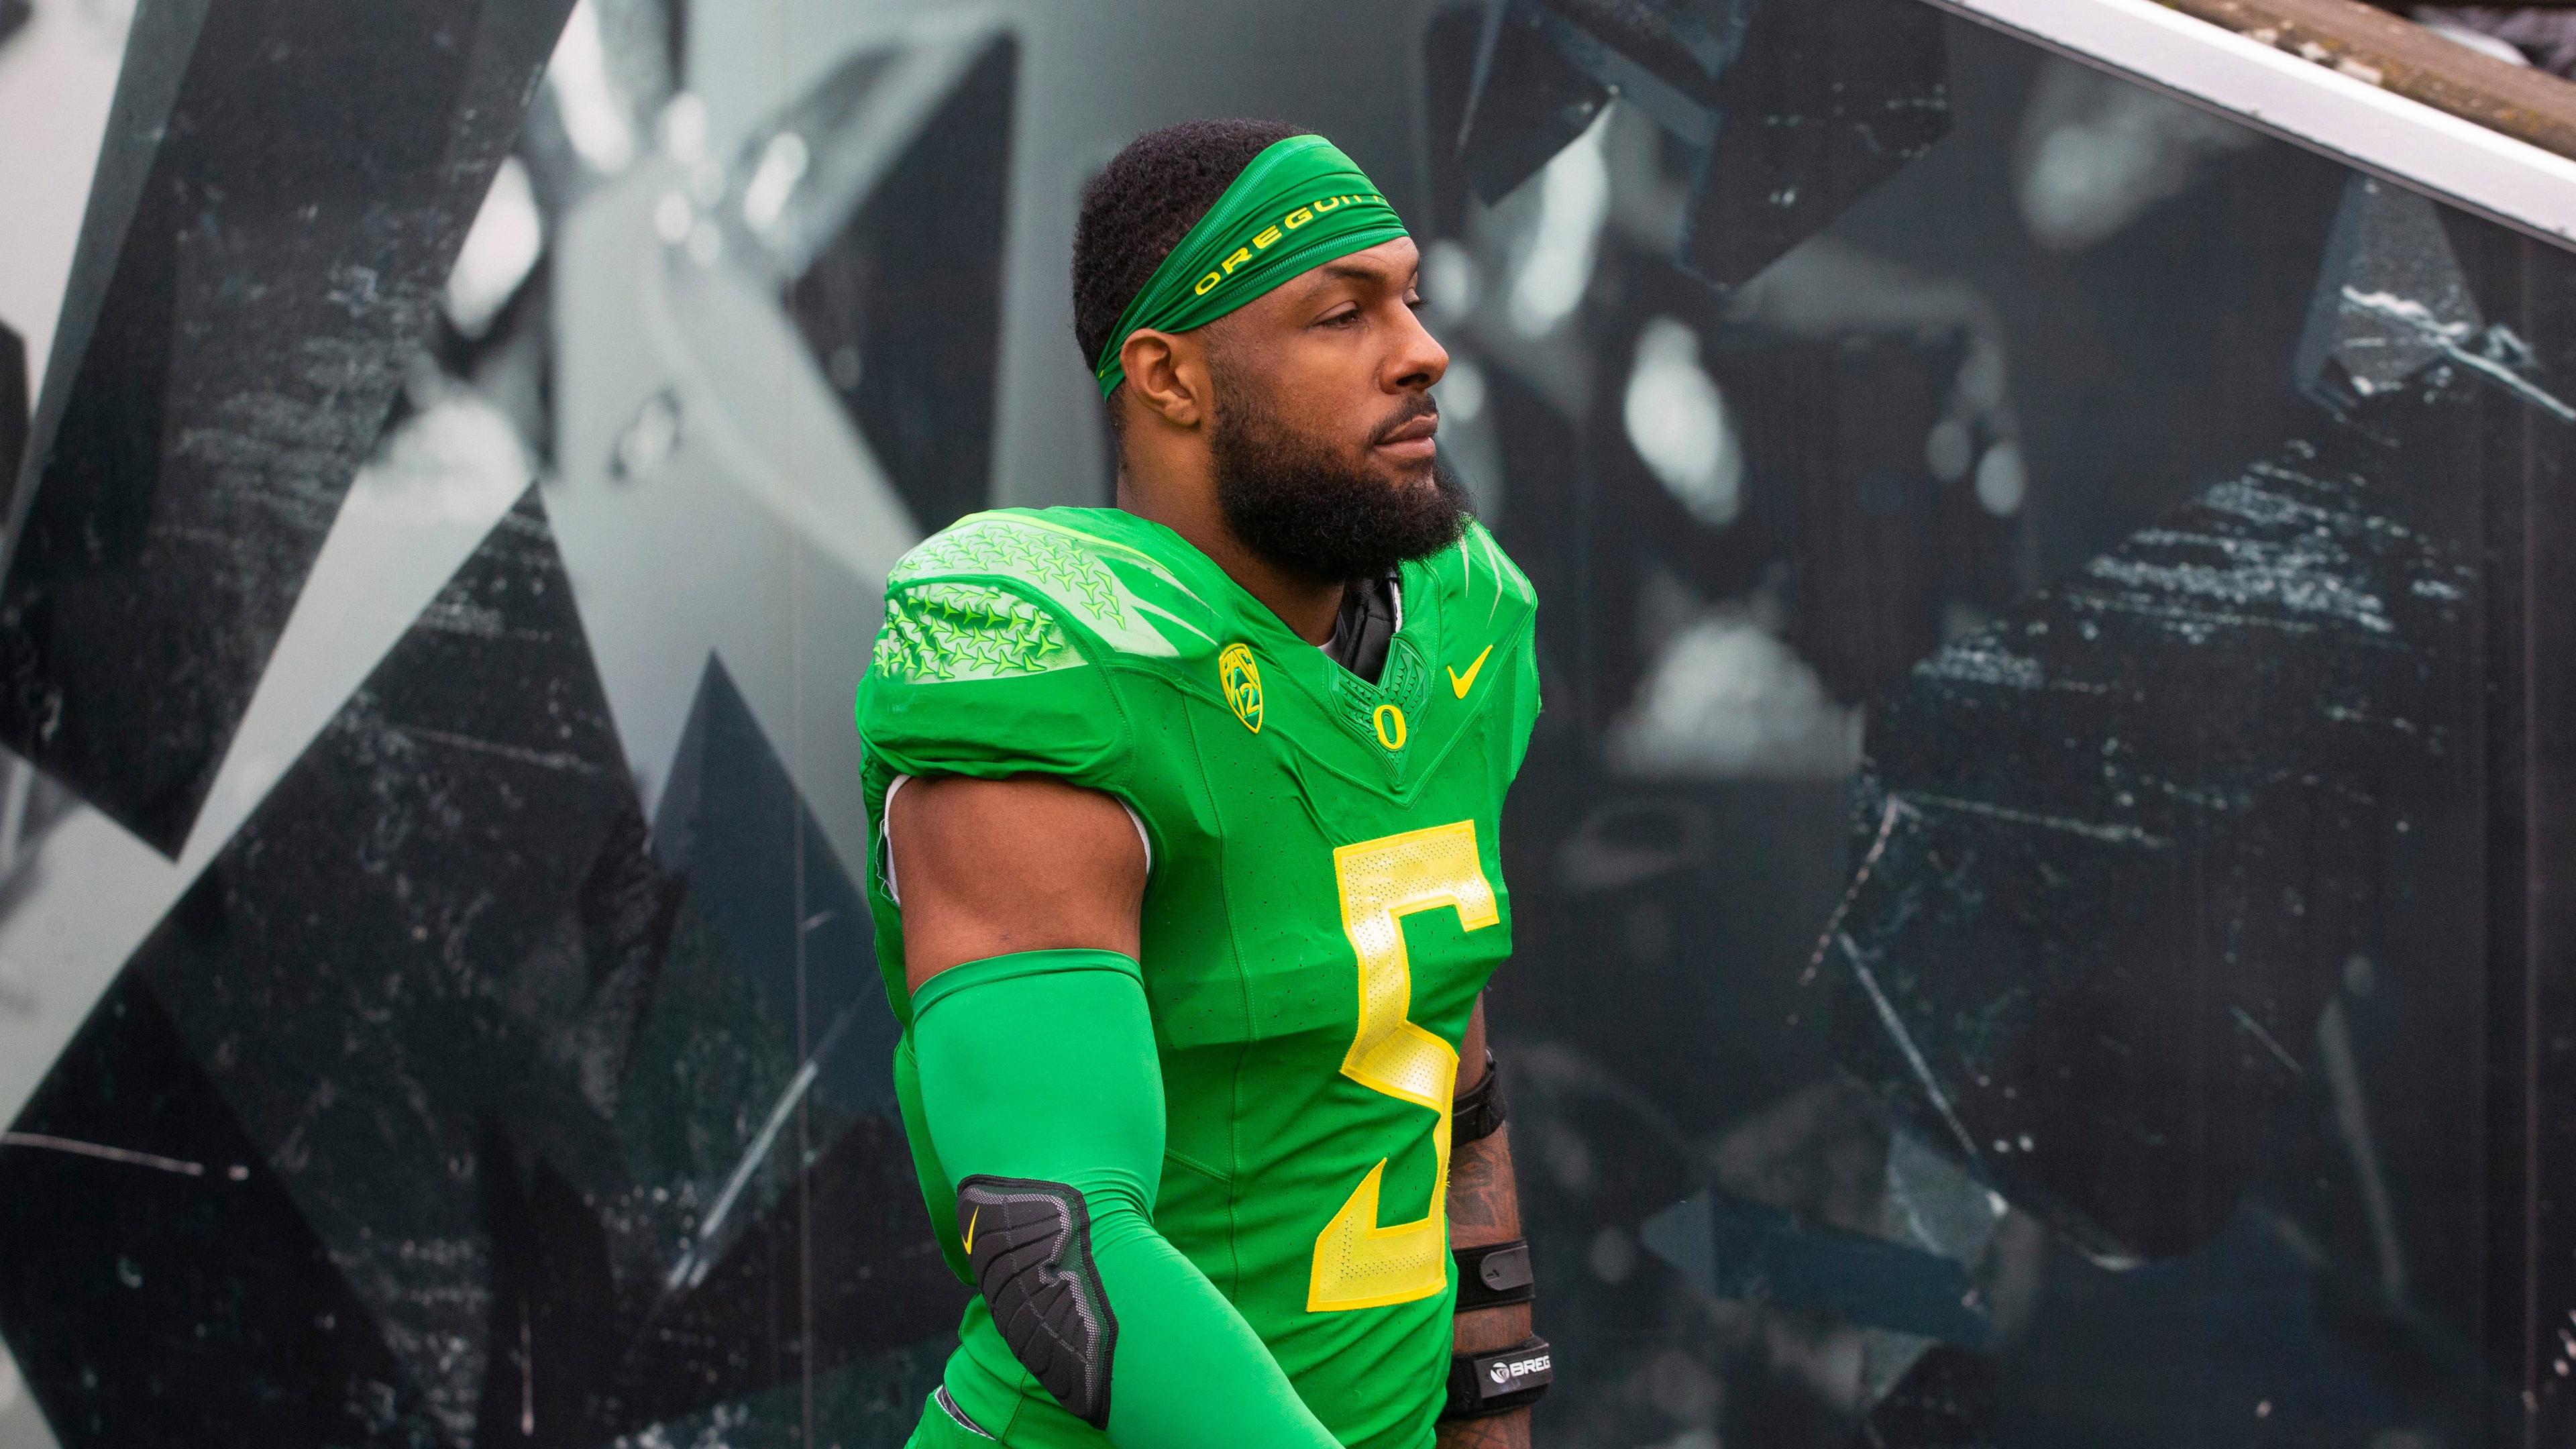 Oregon's Kayvon Thibodeaux enters the stadium for the game against Oregon State / Chris Pietsch/The Register-Guard / USA TODAY NETWORK